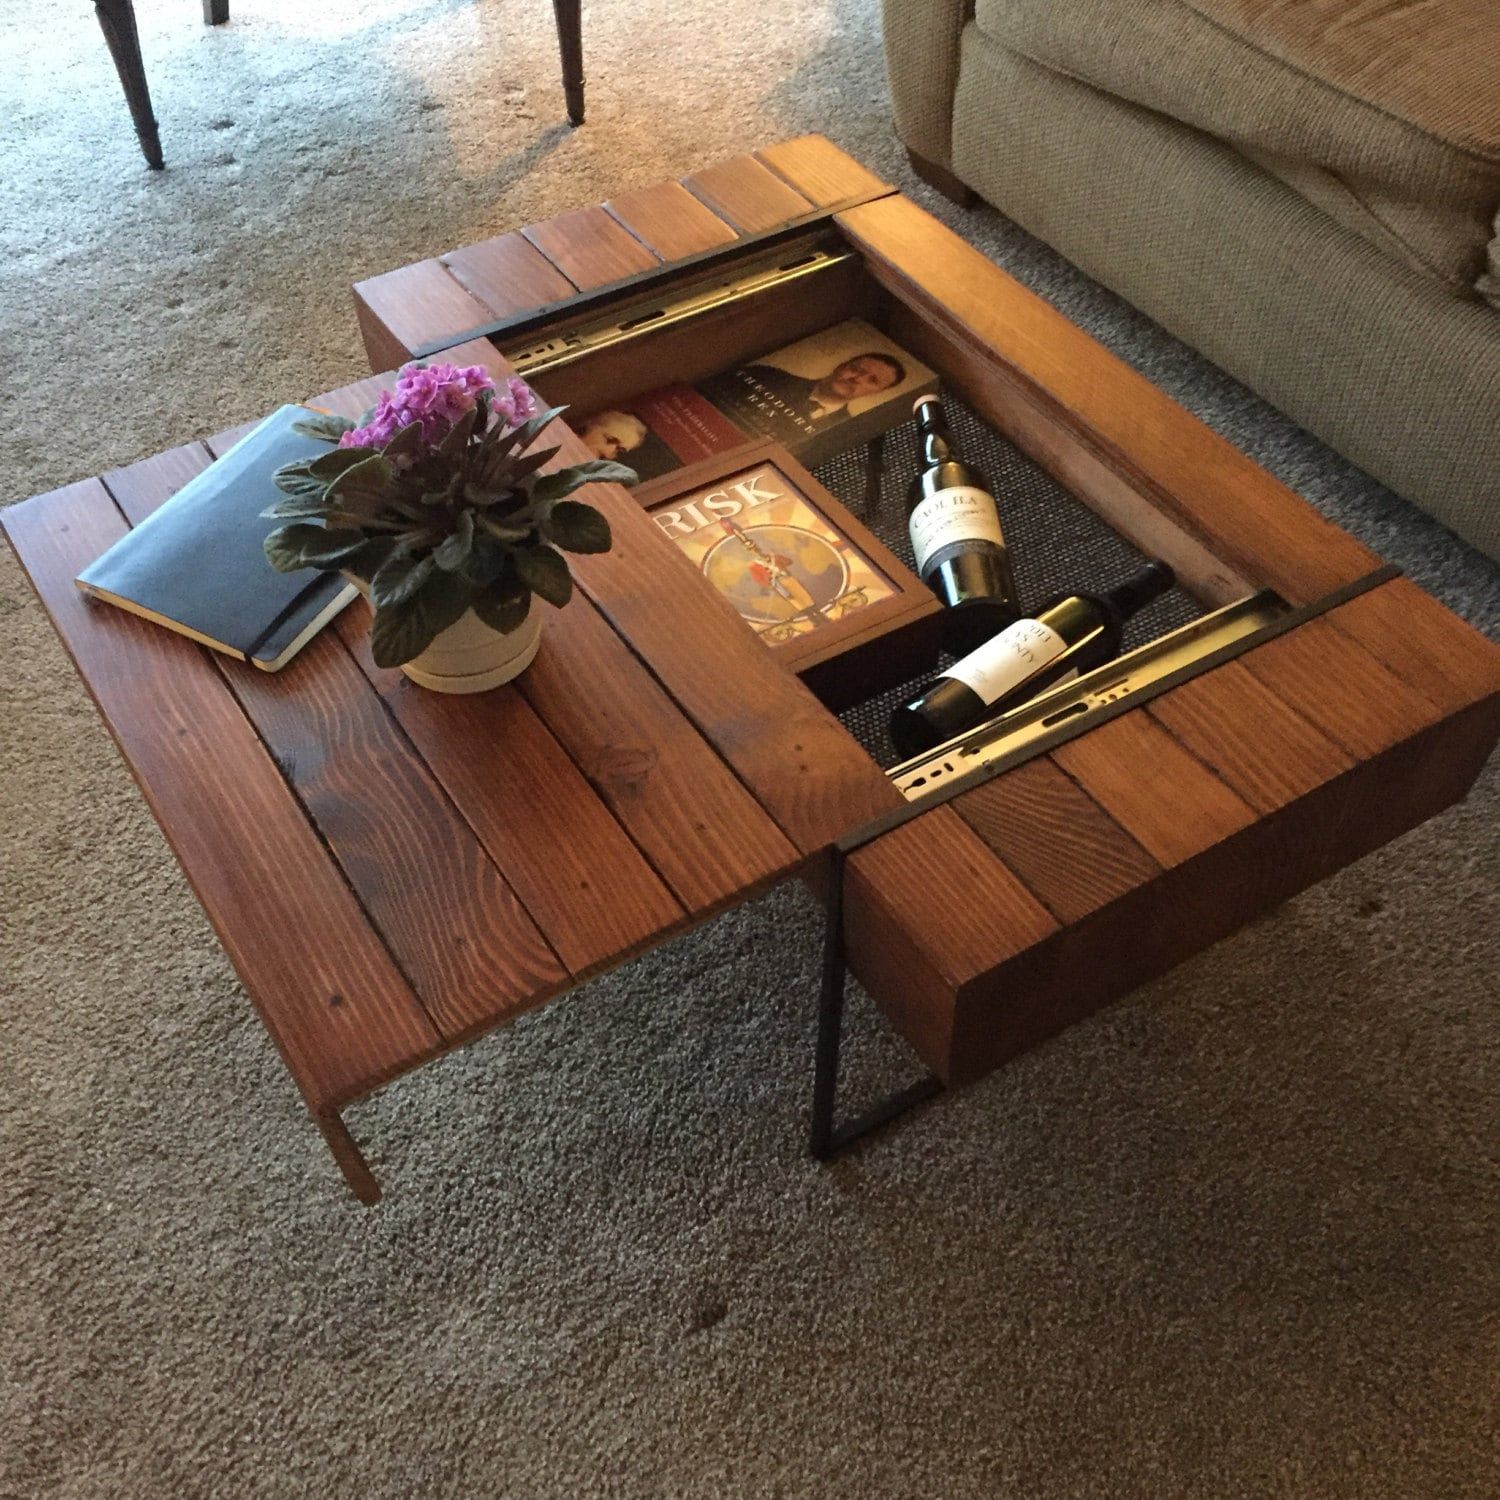 Block Coffee Table With Hidden Storage Within Modern Coffee Tables With Hidden Storage Compartments (View 3 of 20)